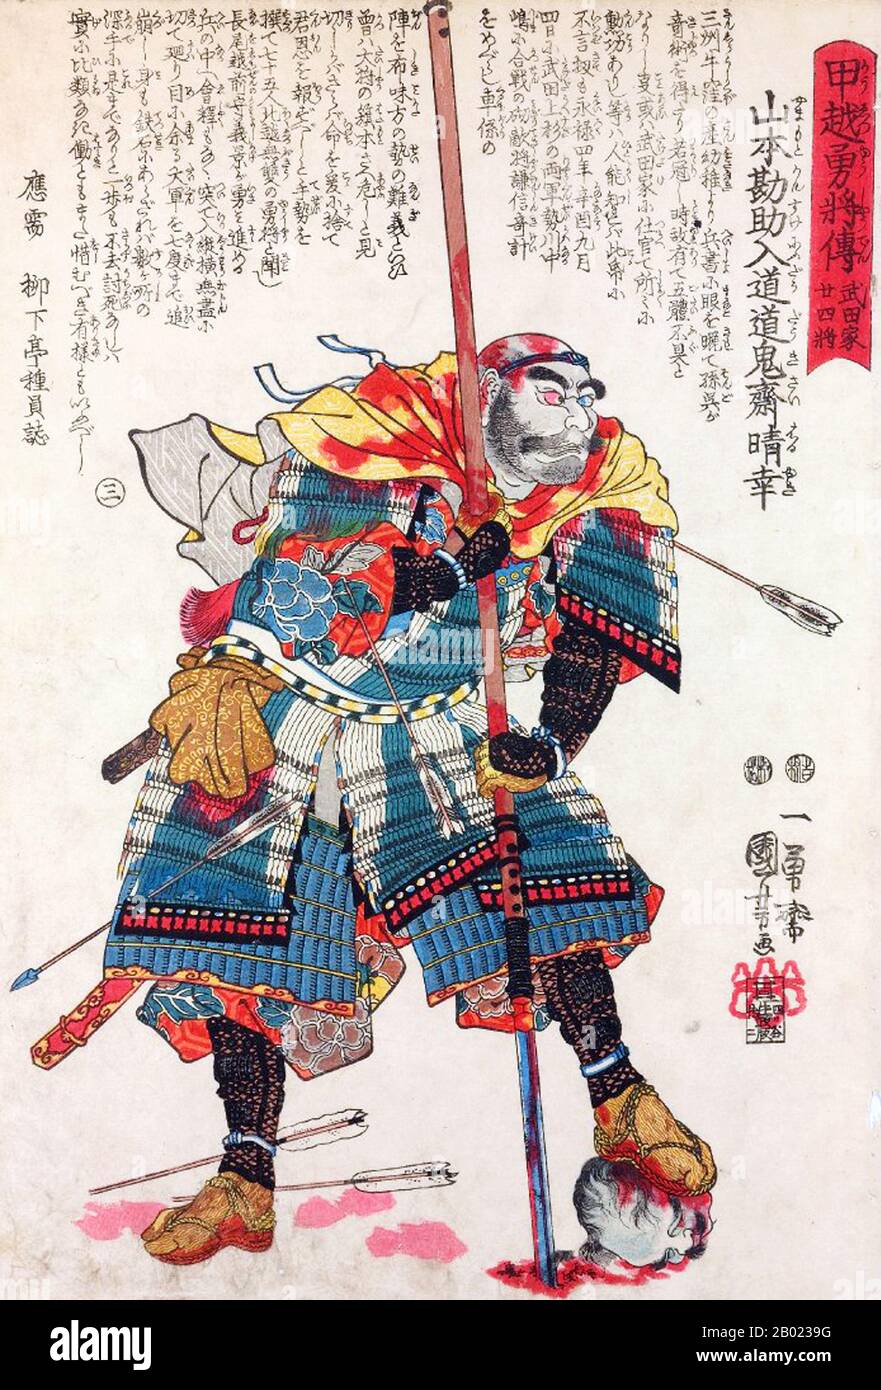 Yamamoto Kansuke (山本 勘助, 1501 – October 18, 1561) was a Japanese samurai of the 16th century who was one of Takeda Shingen's most trusted Twenty-Four Generals. Also known by his formal name, Haruyuki (晴幸), he was a brilliant strategist, and is particularly known for his plan which led to victory in the fourth battle of Kawanakajima against Uesugi Kenshin. However, Kansuke never lived to see his plan succeed; thinking it to have failed, he charged headlong into the enemy ranks, dying in battle.  From: 'Stories of Courageous Generals of the Provinces of Echigo and Kai' (Kôetsu yûshô den, 甲越勇將傳). Stock Photo